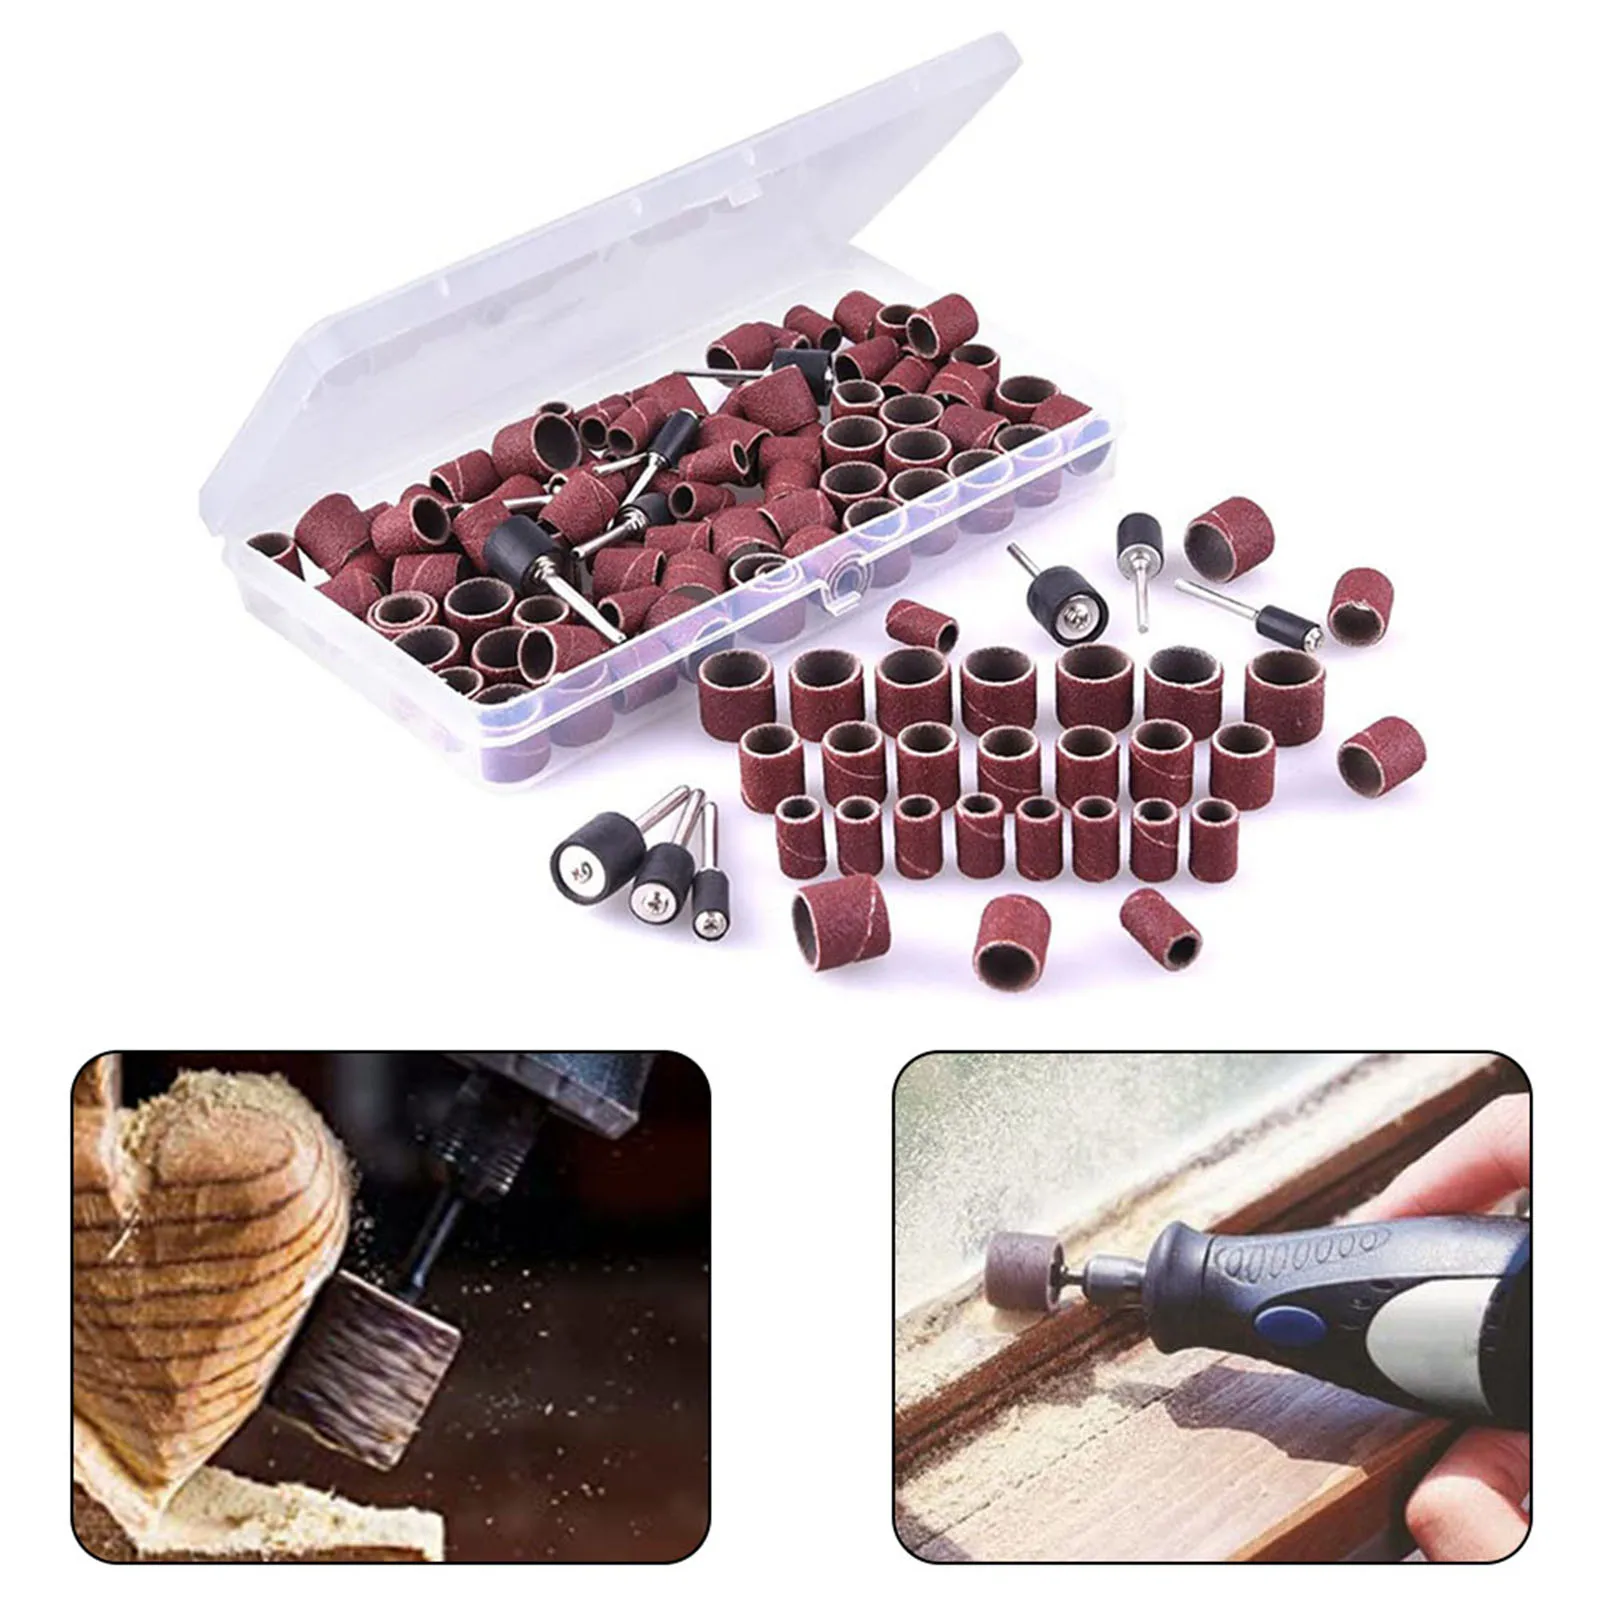 

132 Pcs Polishing Drill Bit Grinding Head Abrasive Sanding Drum 120 Grit Electric Grinder Buffing Tools Turning Tool Accessories